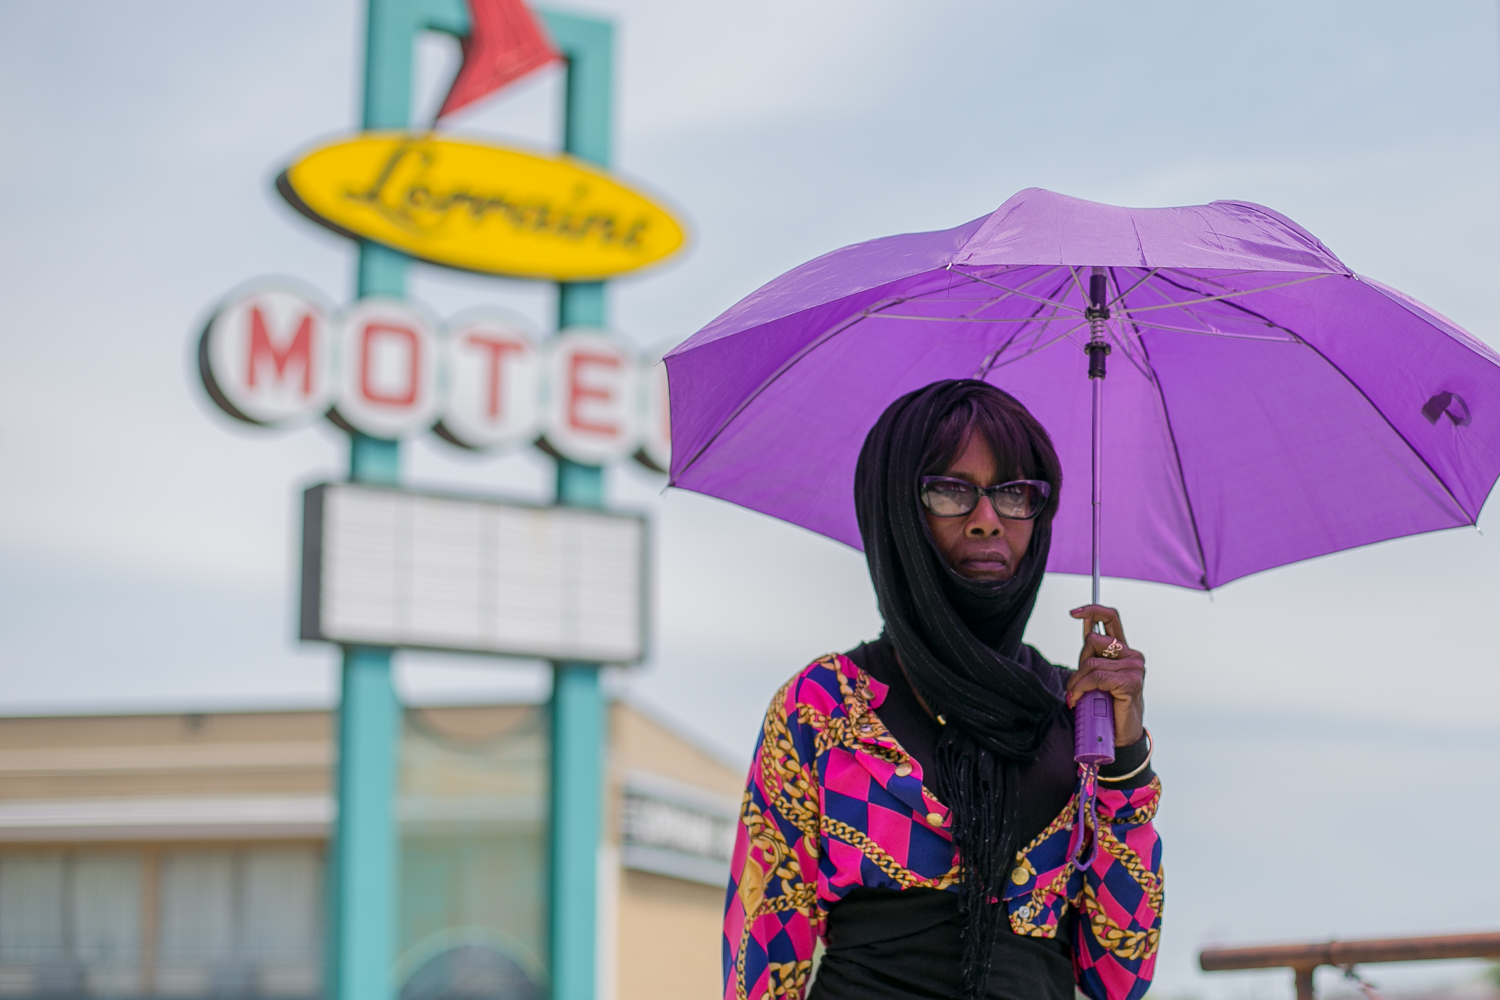   Jacqueline Smith has been living/protesting outside the Lorraine Hotel for 27 years 95 days. Martin Luther King, Jr. was killed on the balcony of the hotel on April 4, 1968. It later became the National Civil Rights museum. Smith says the motel sho